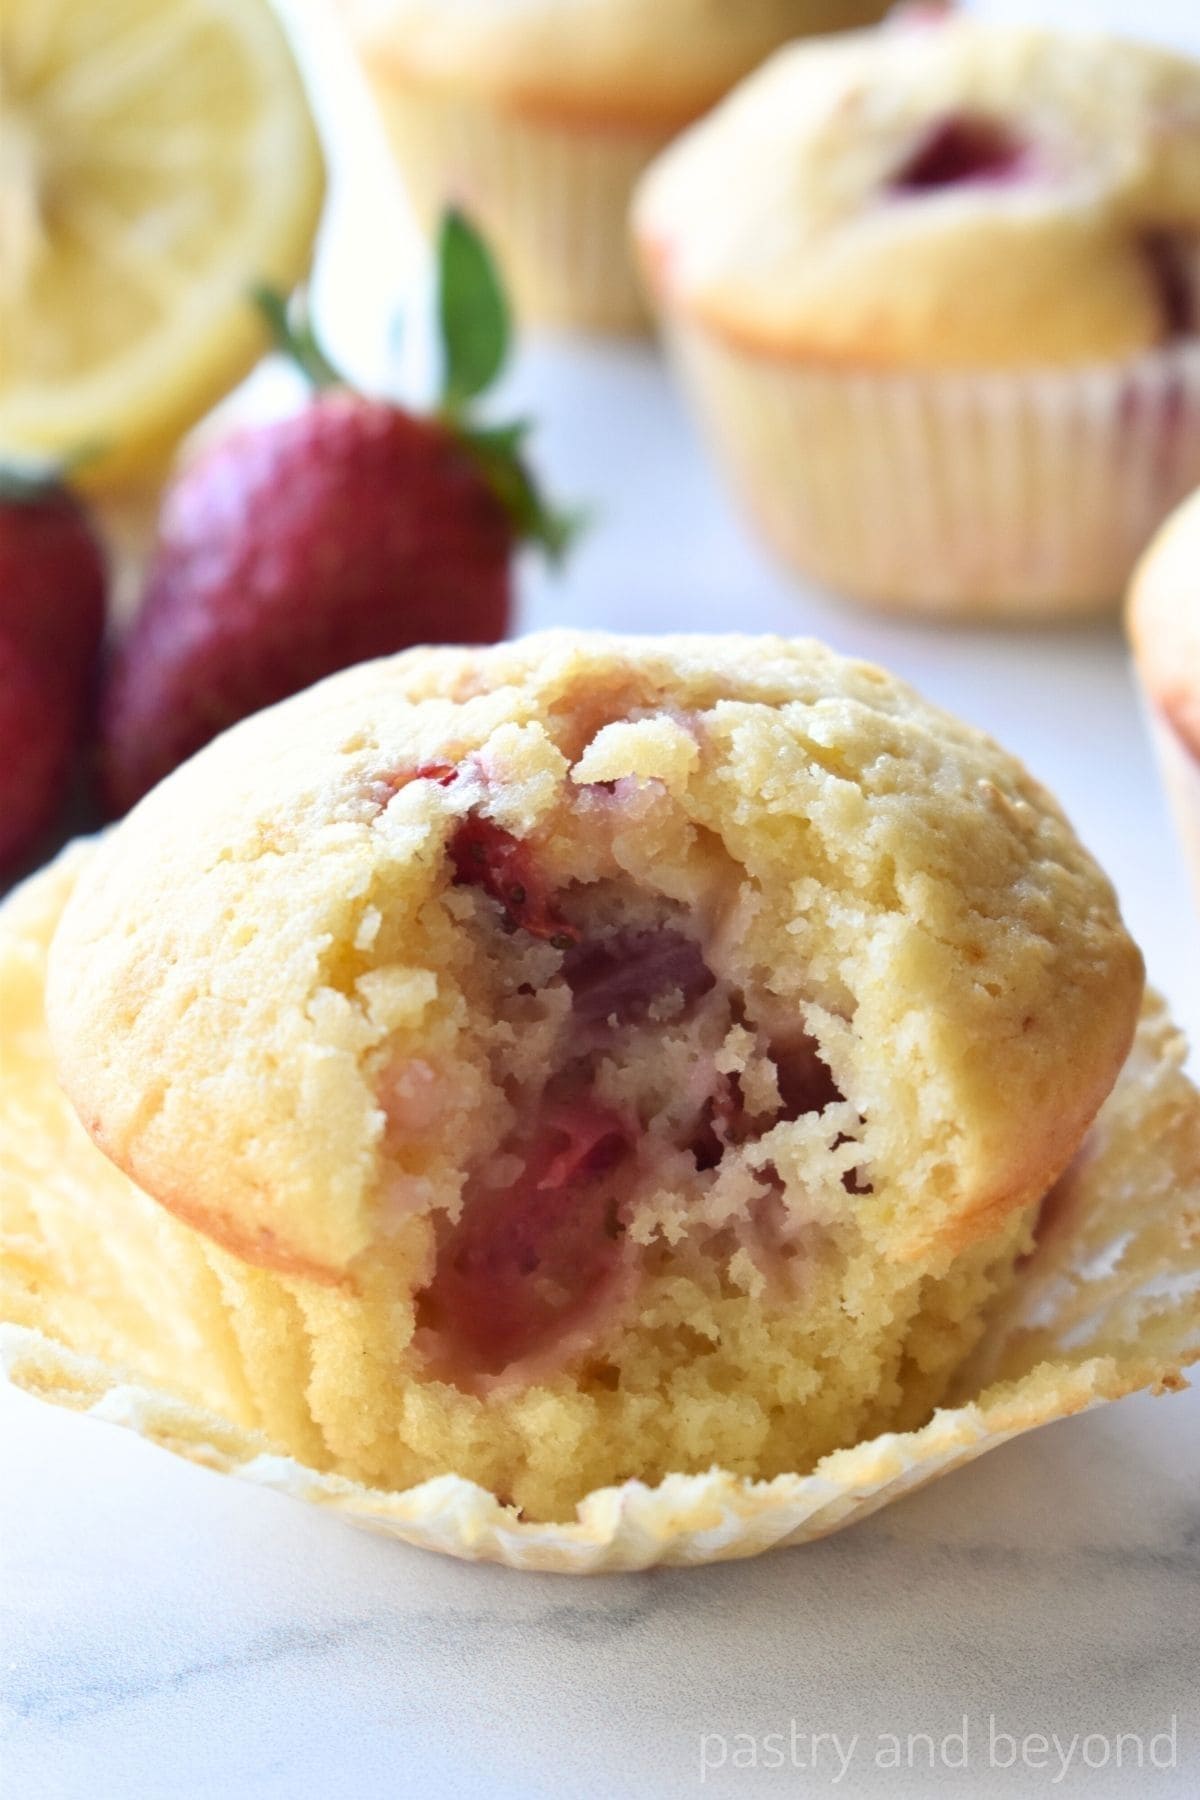 Strawberry lemon muffin with a bite taken from it.